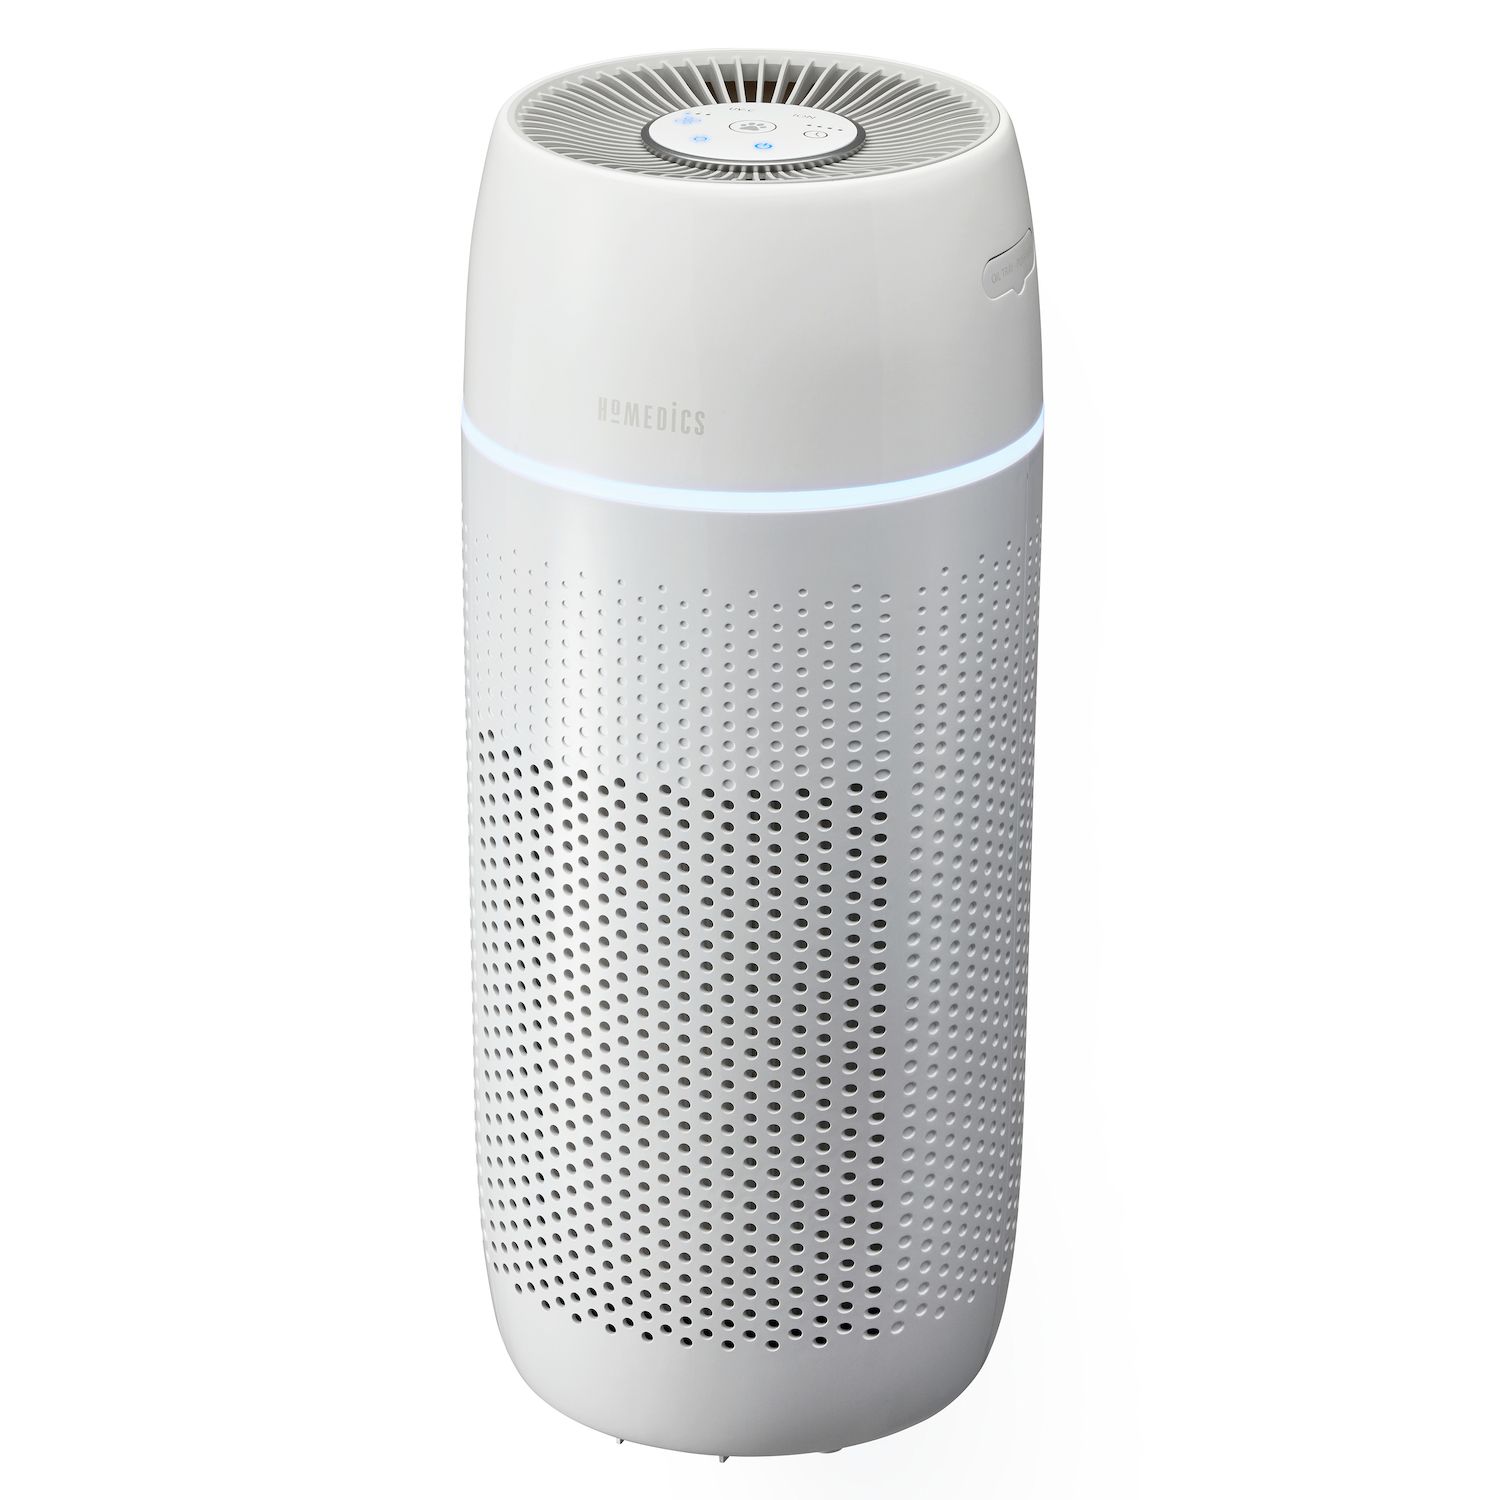 Image for HoMedics TotalClean PetPlus 5-in-1 Air Purifier at Kohl's.